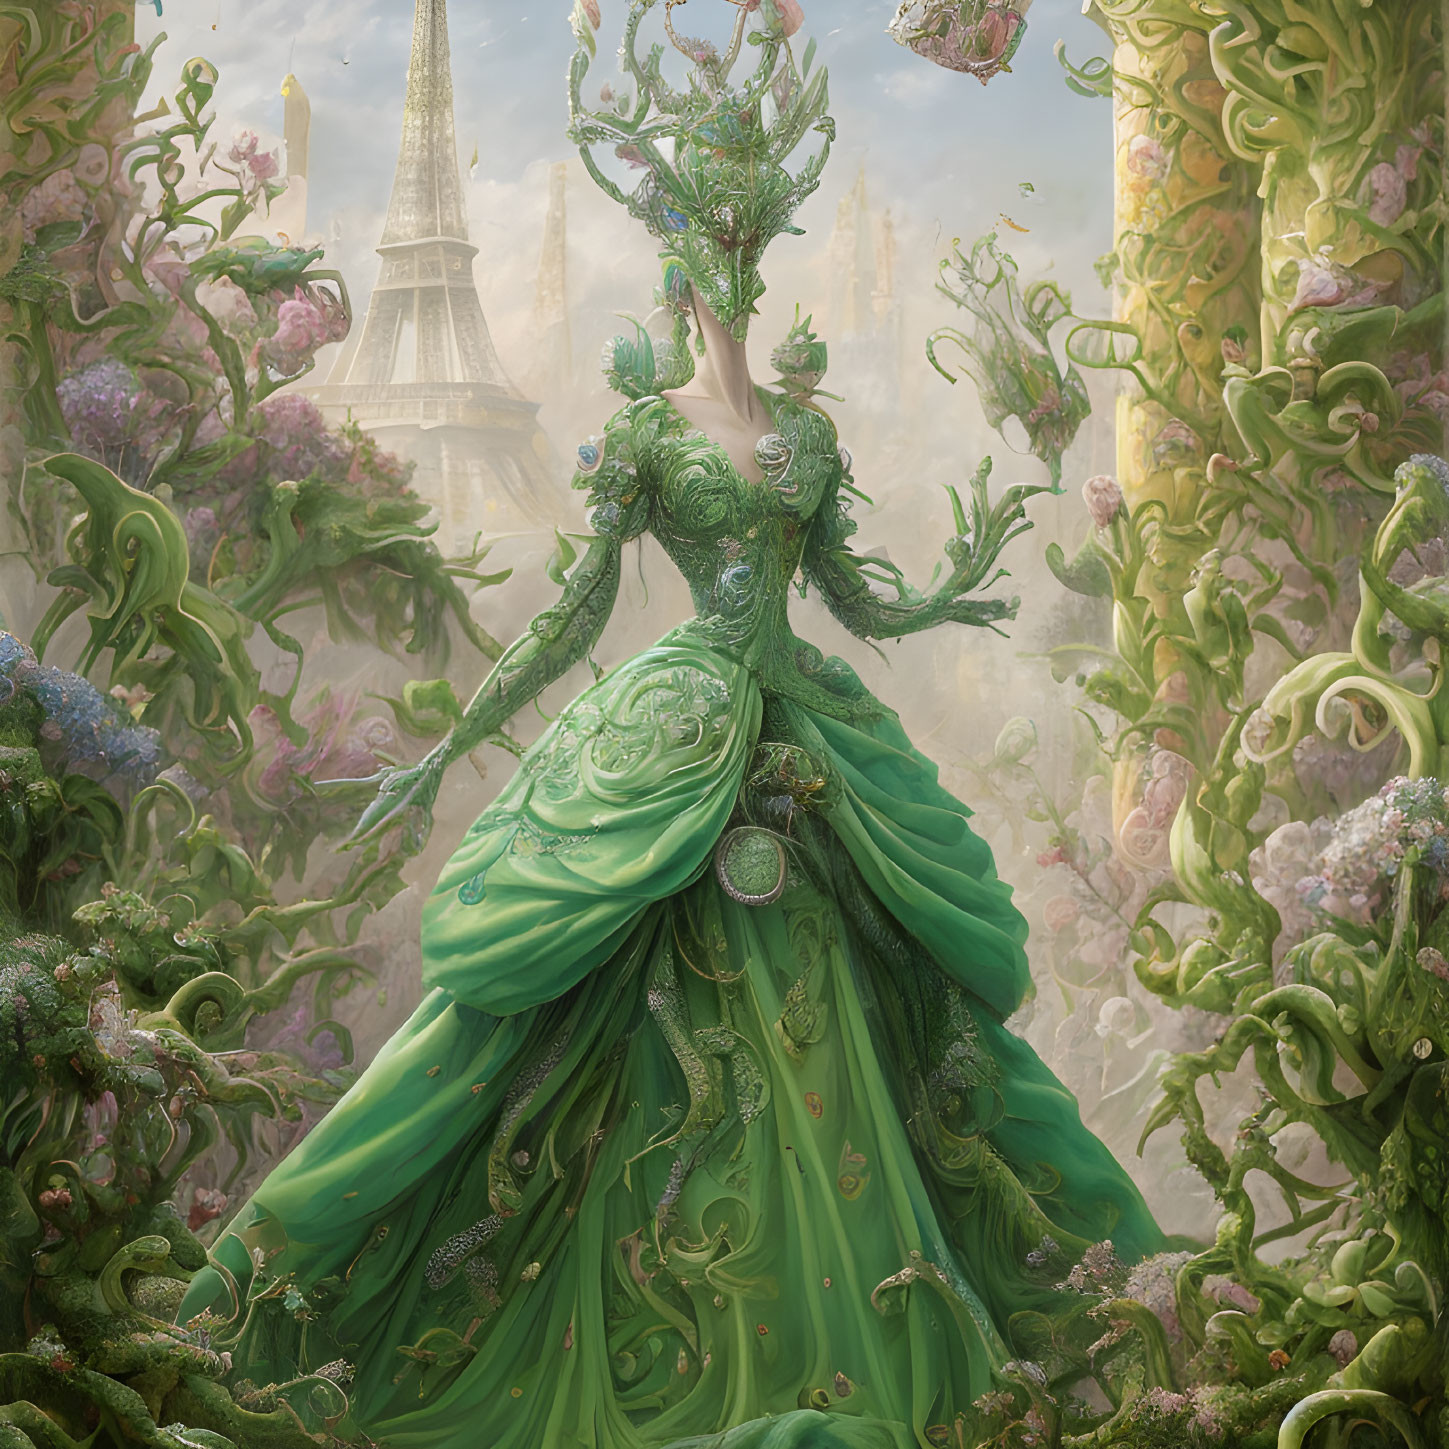 Majestic green-clad figure with intricate vines in fantasy setting